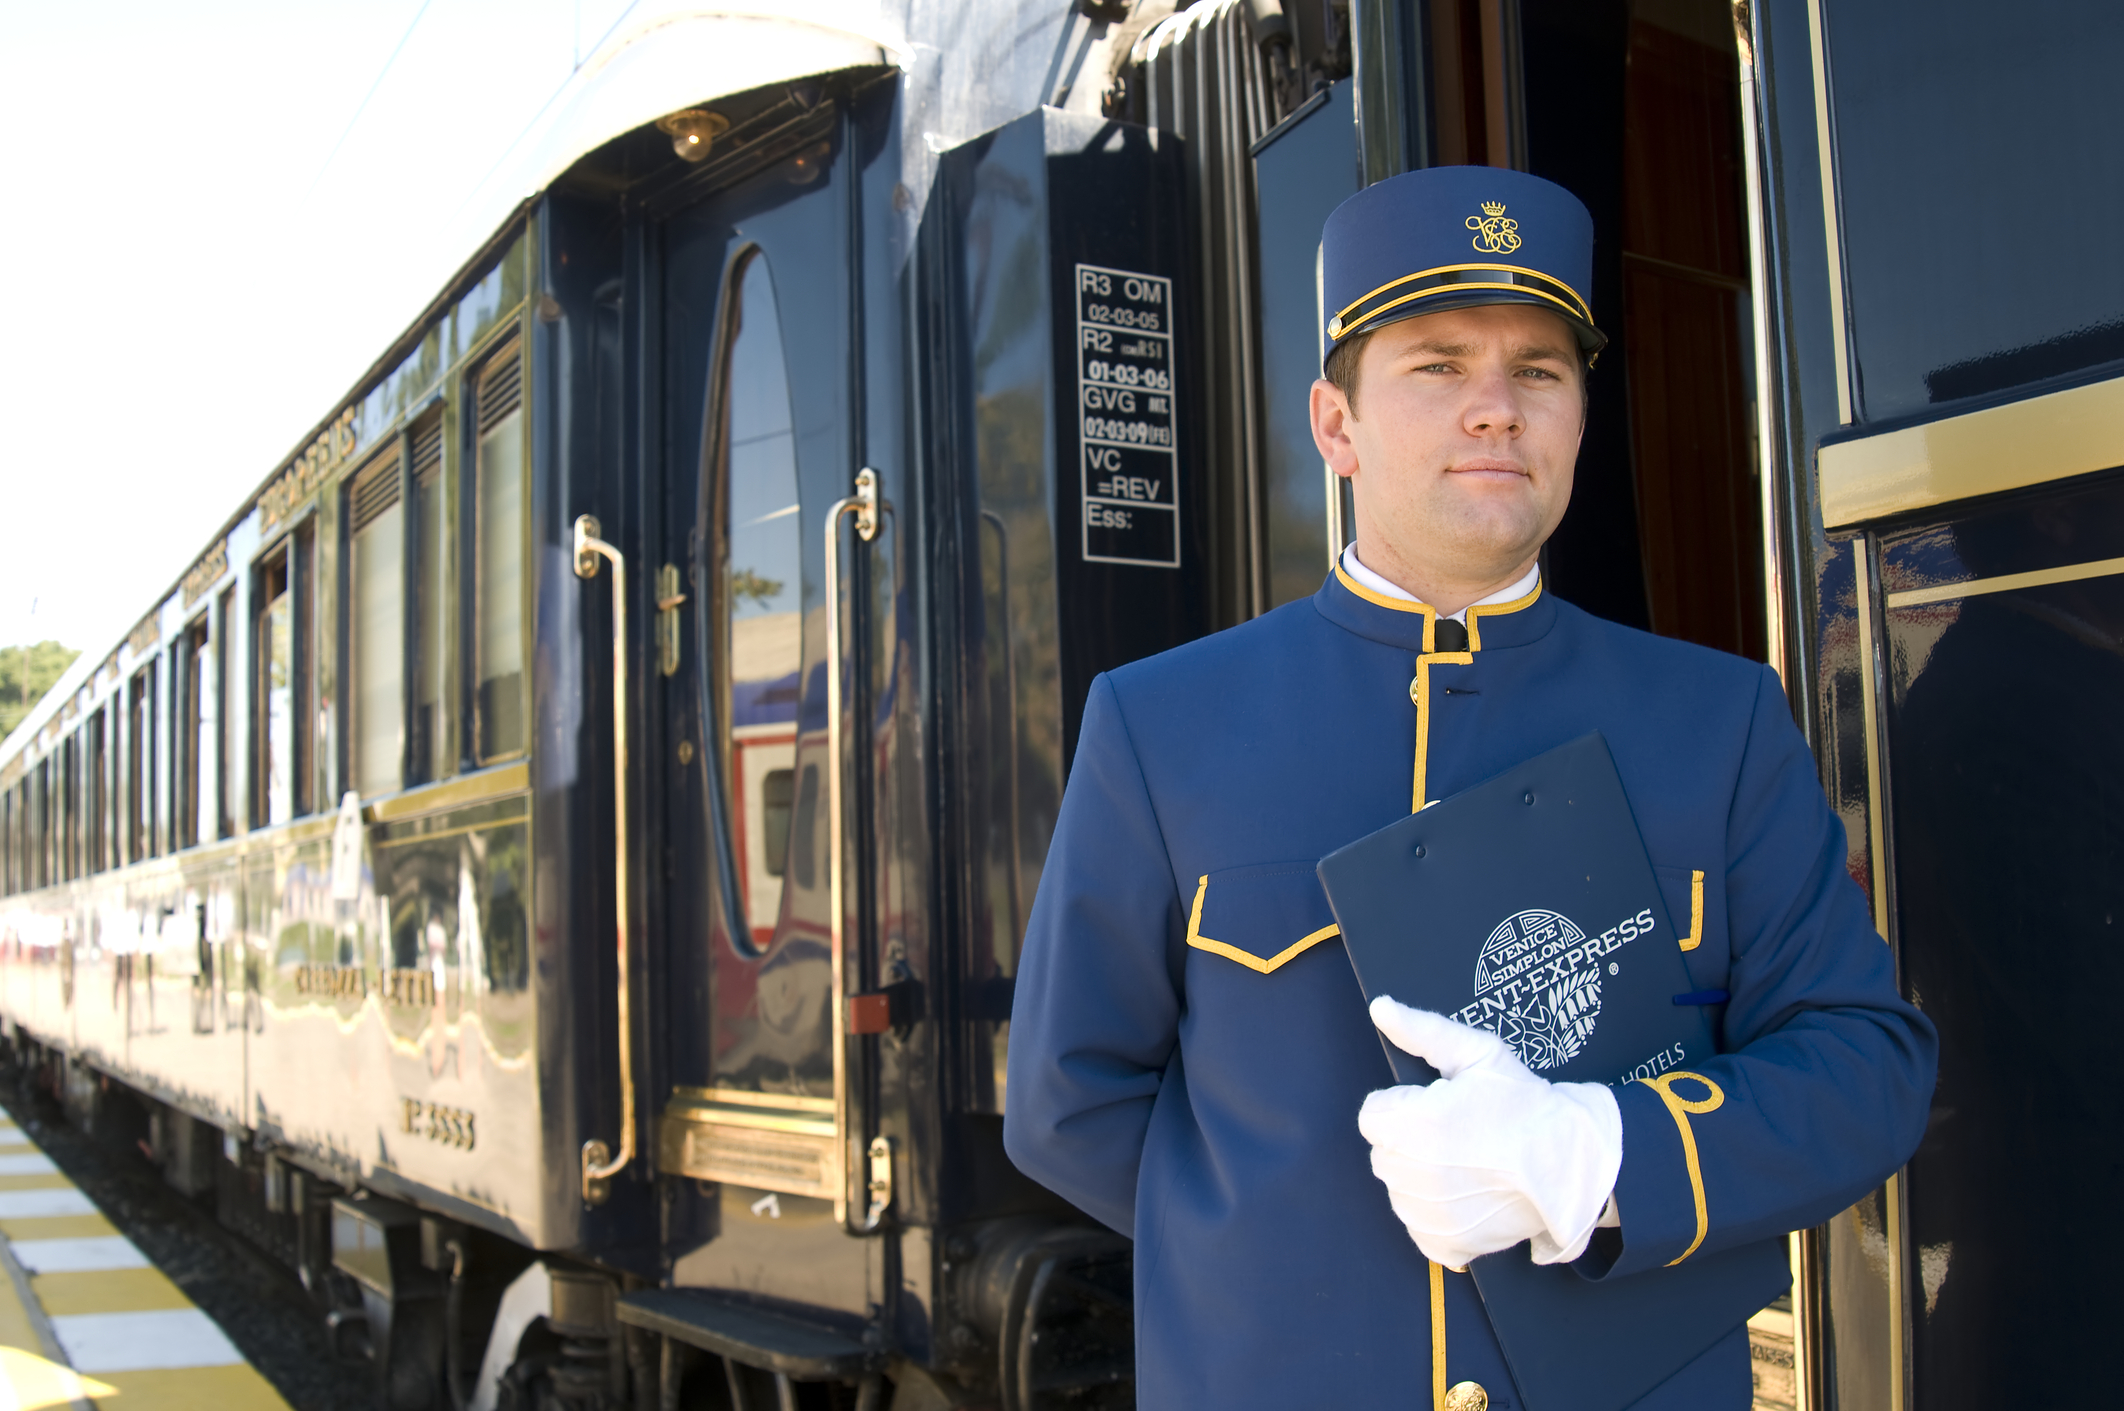 La Dolce Vita travels on the Orient Express